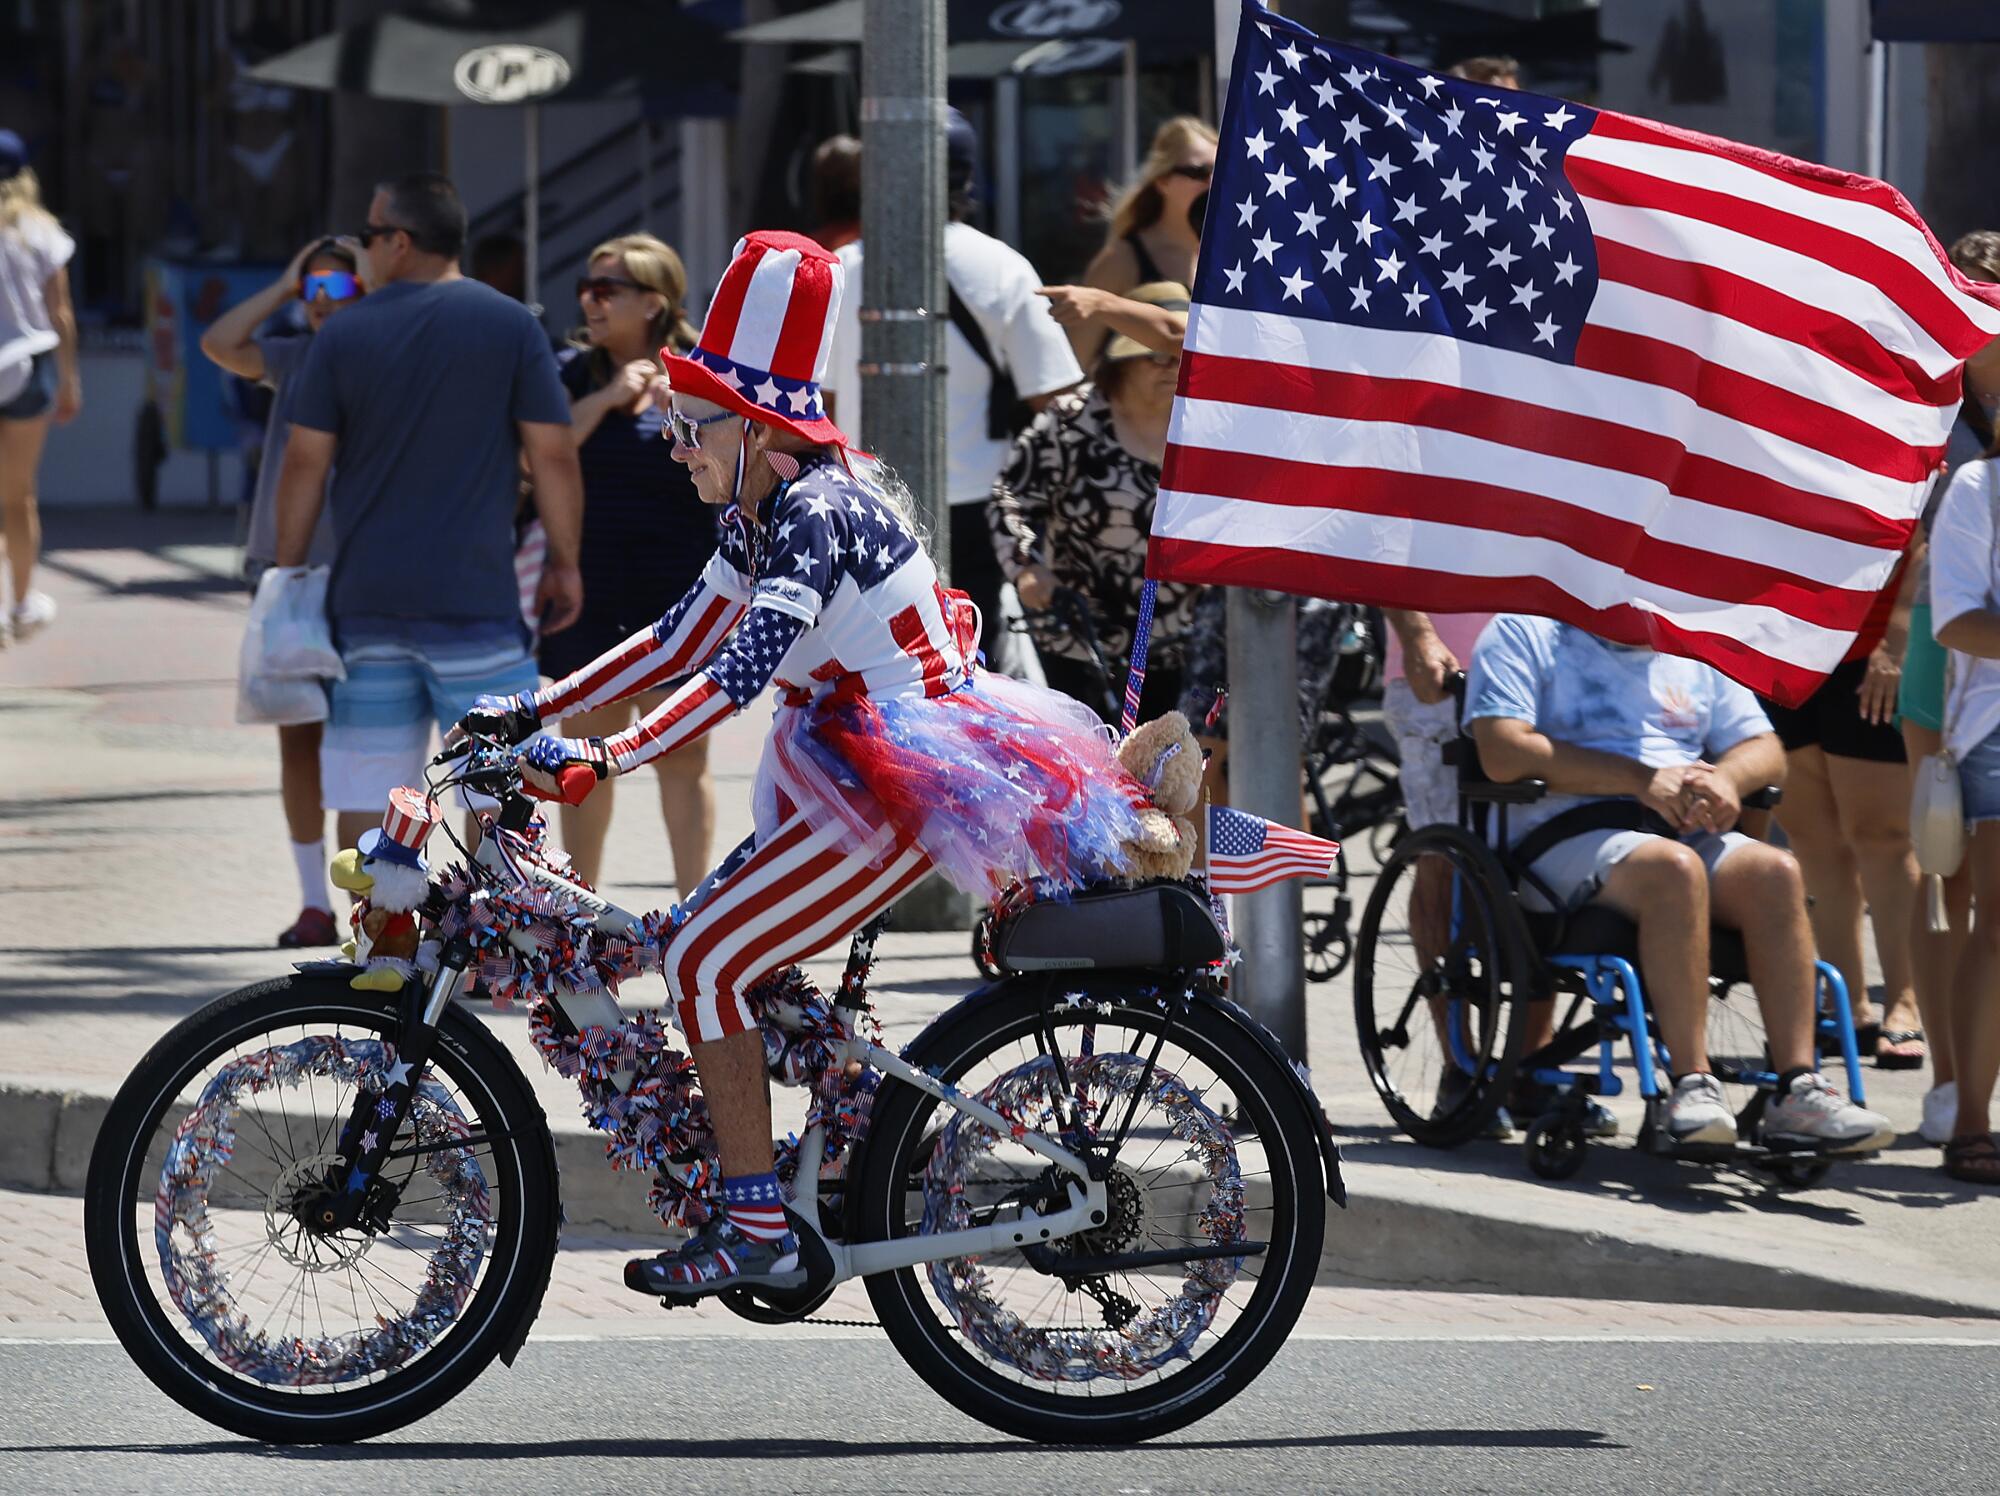 A person in red, white and blue rides a bike with a U.S. flag